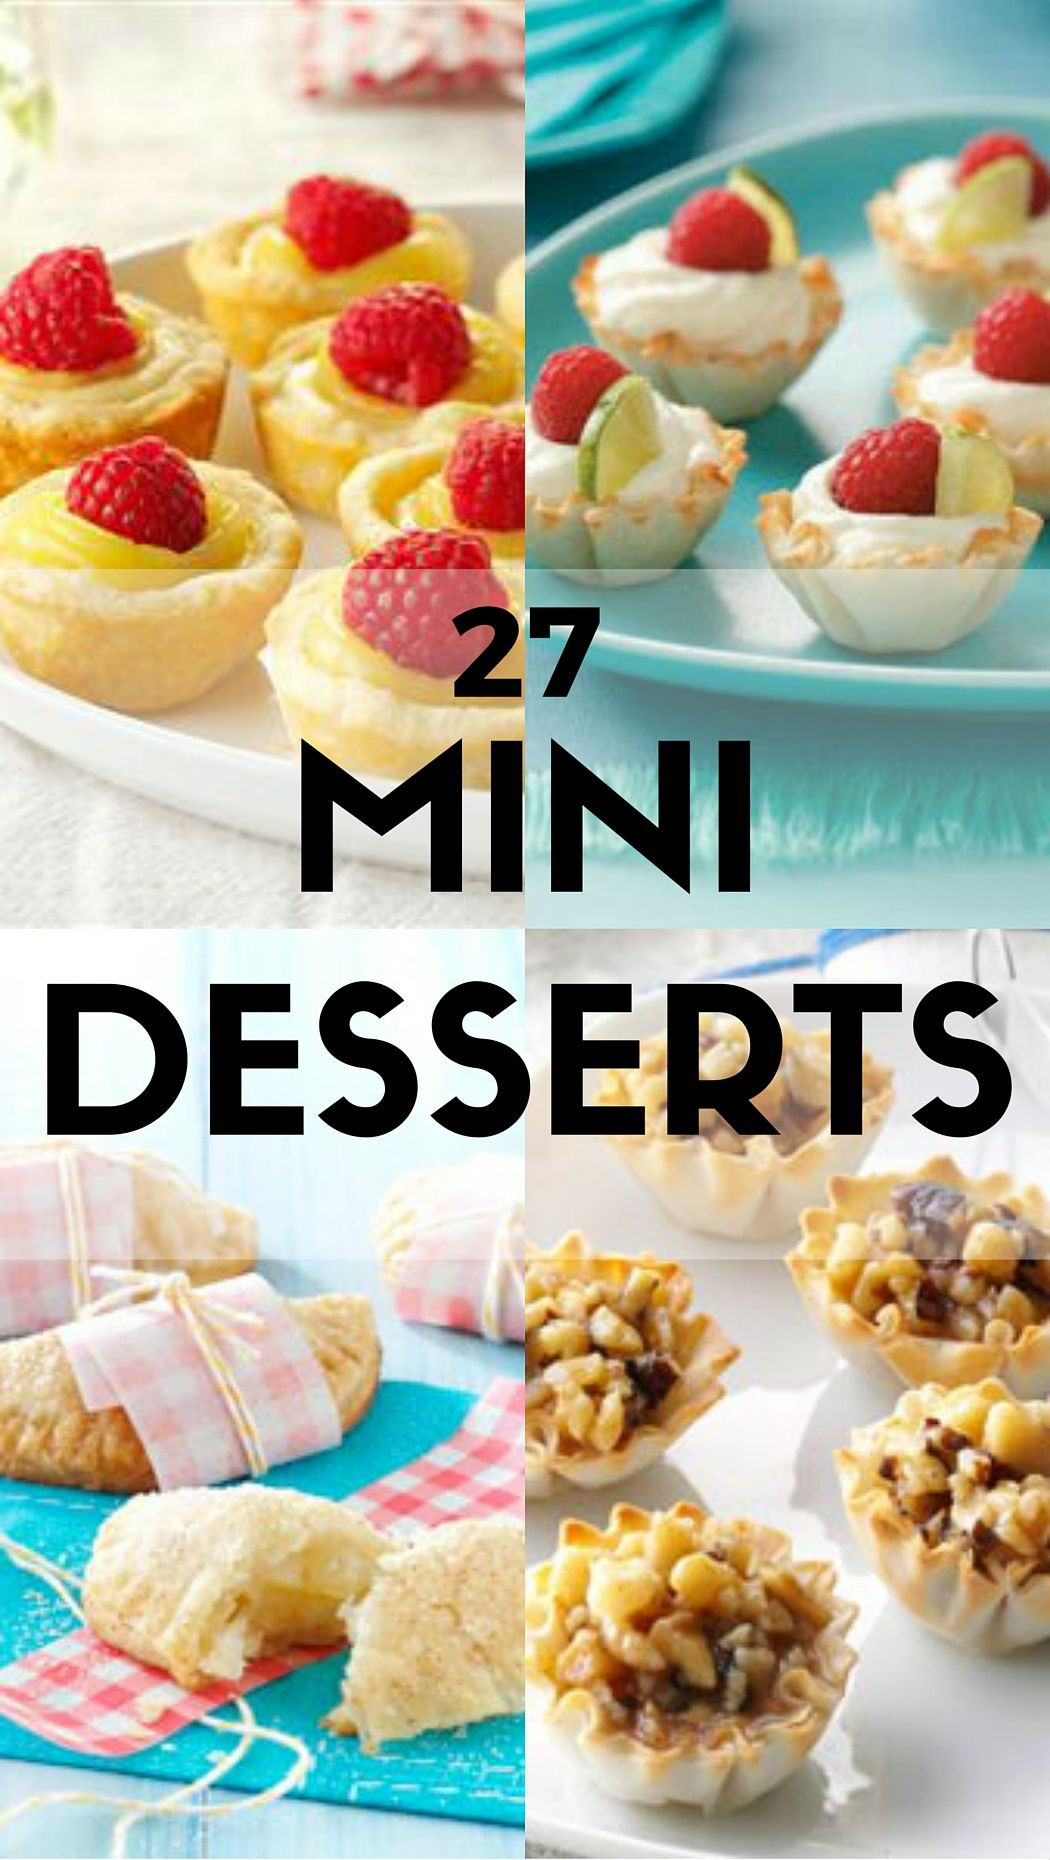 Mini Fall Desserts
 32 Absolutely Adorable Mini Desserts You’ll Fall in Love